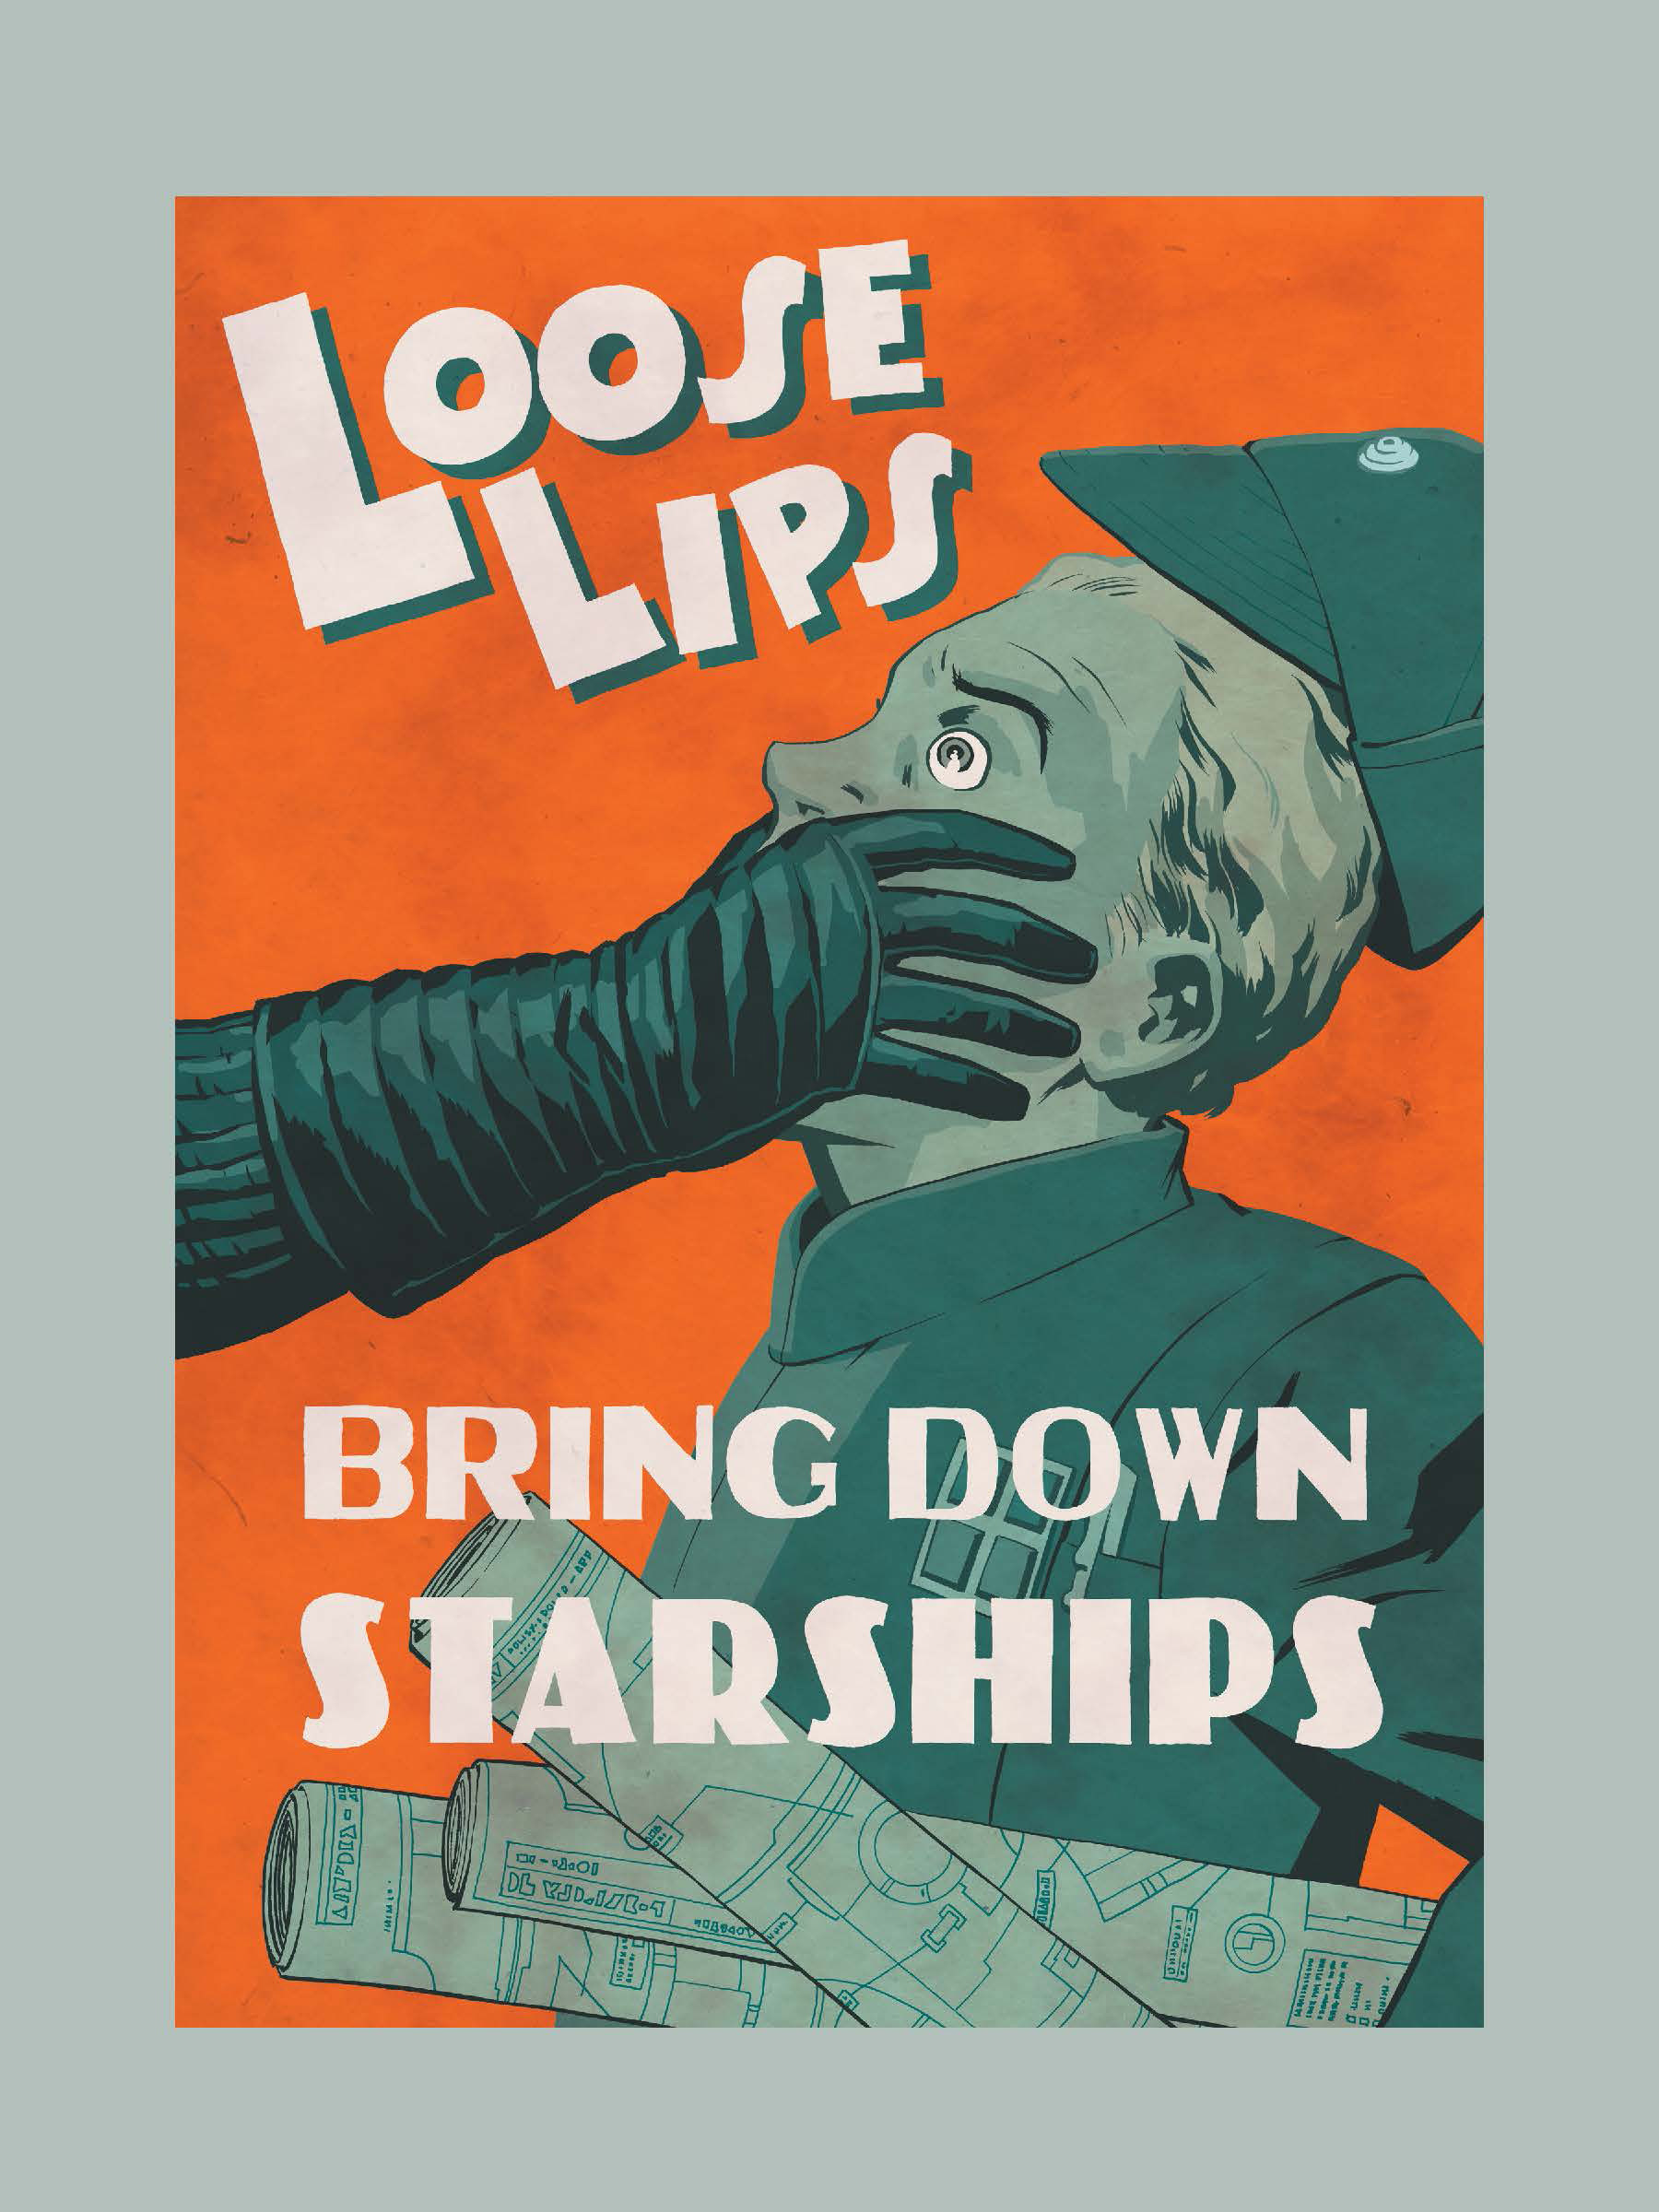 The Book Is Out Oct - Star Wars Propaganda Posters - HD Wallpaper 